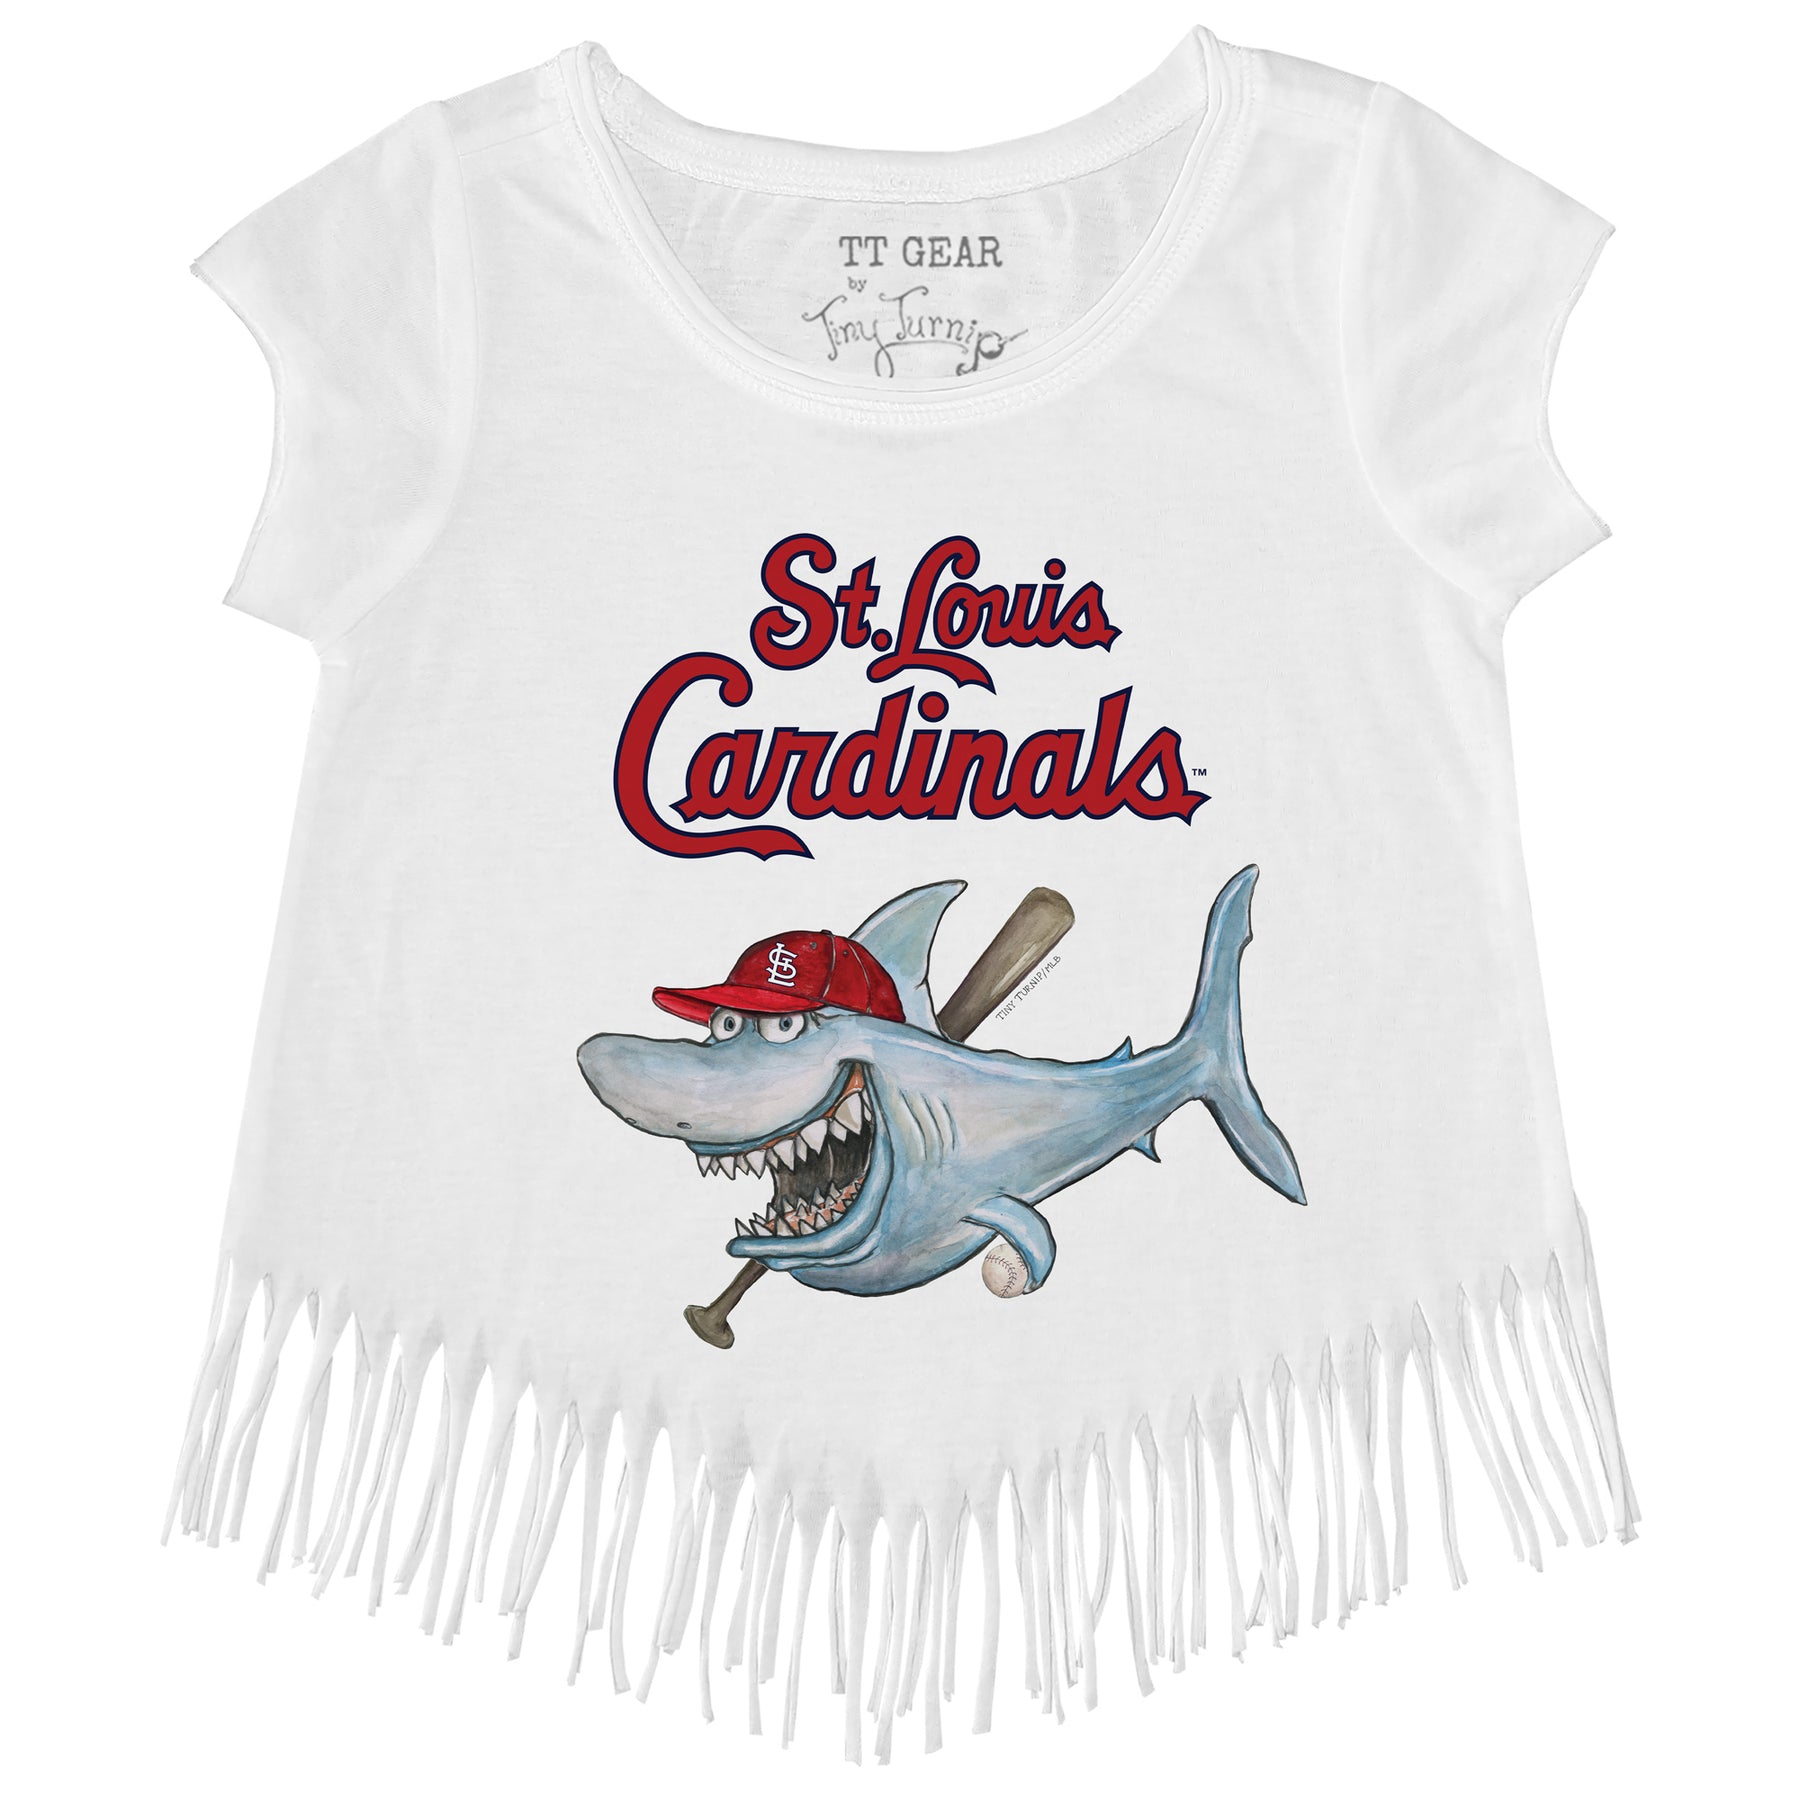 St. Louis Cardinals Tiny Turnip Unisex State Outline 3/4-Sleeve Raglan  T-Shirt - White/Red